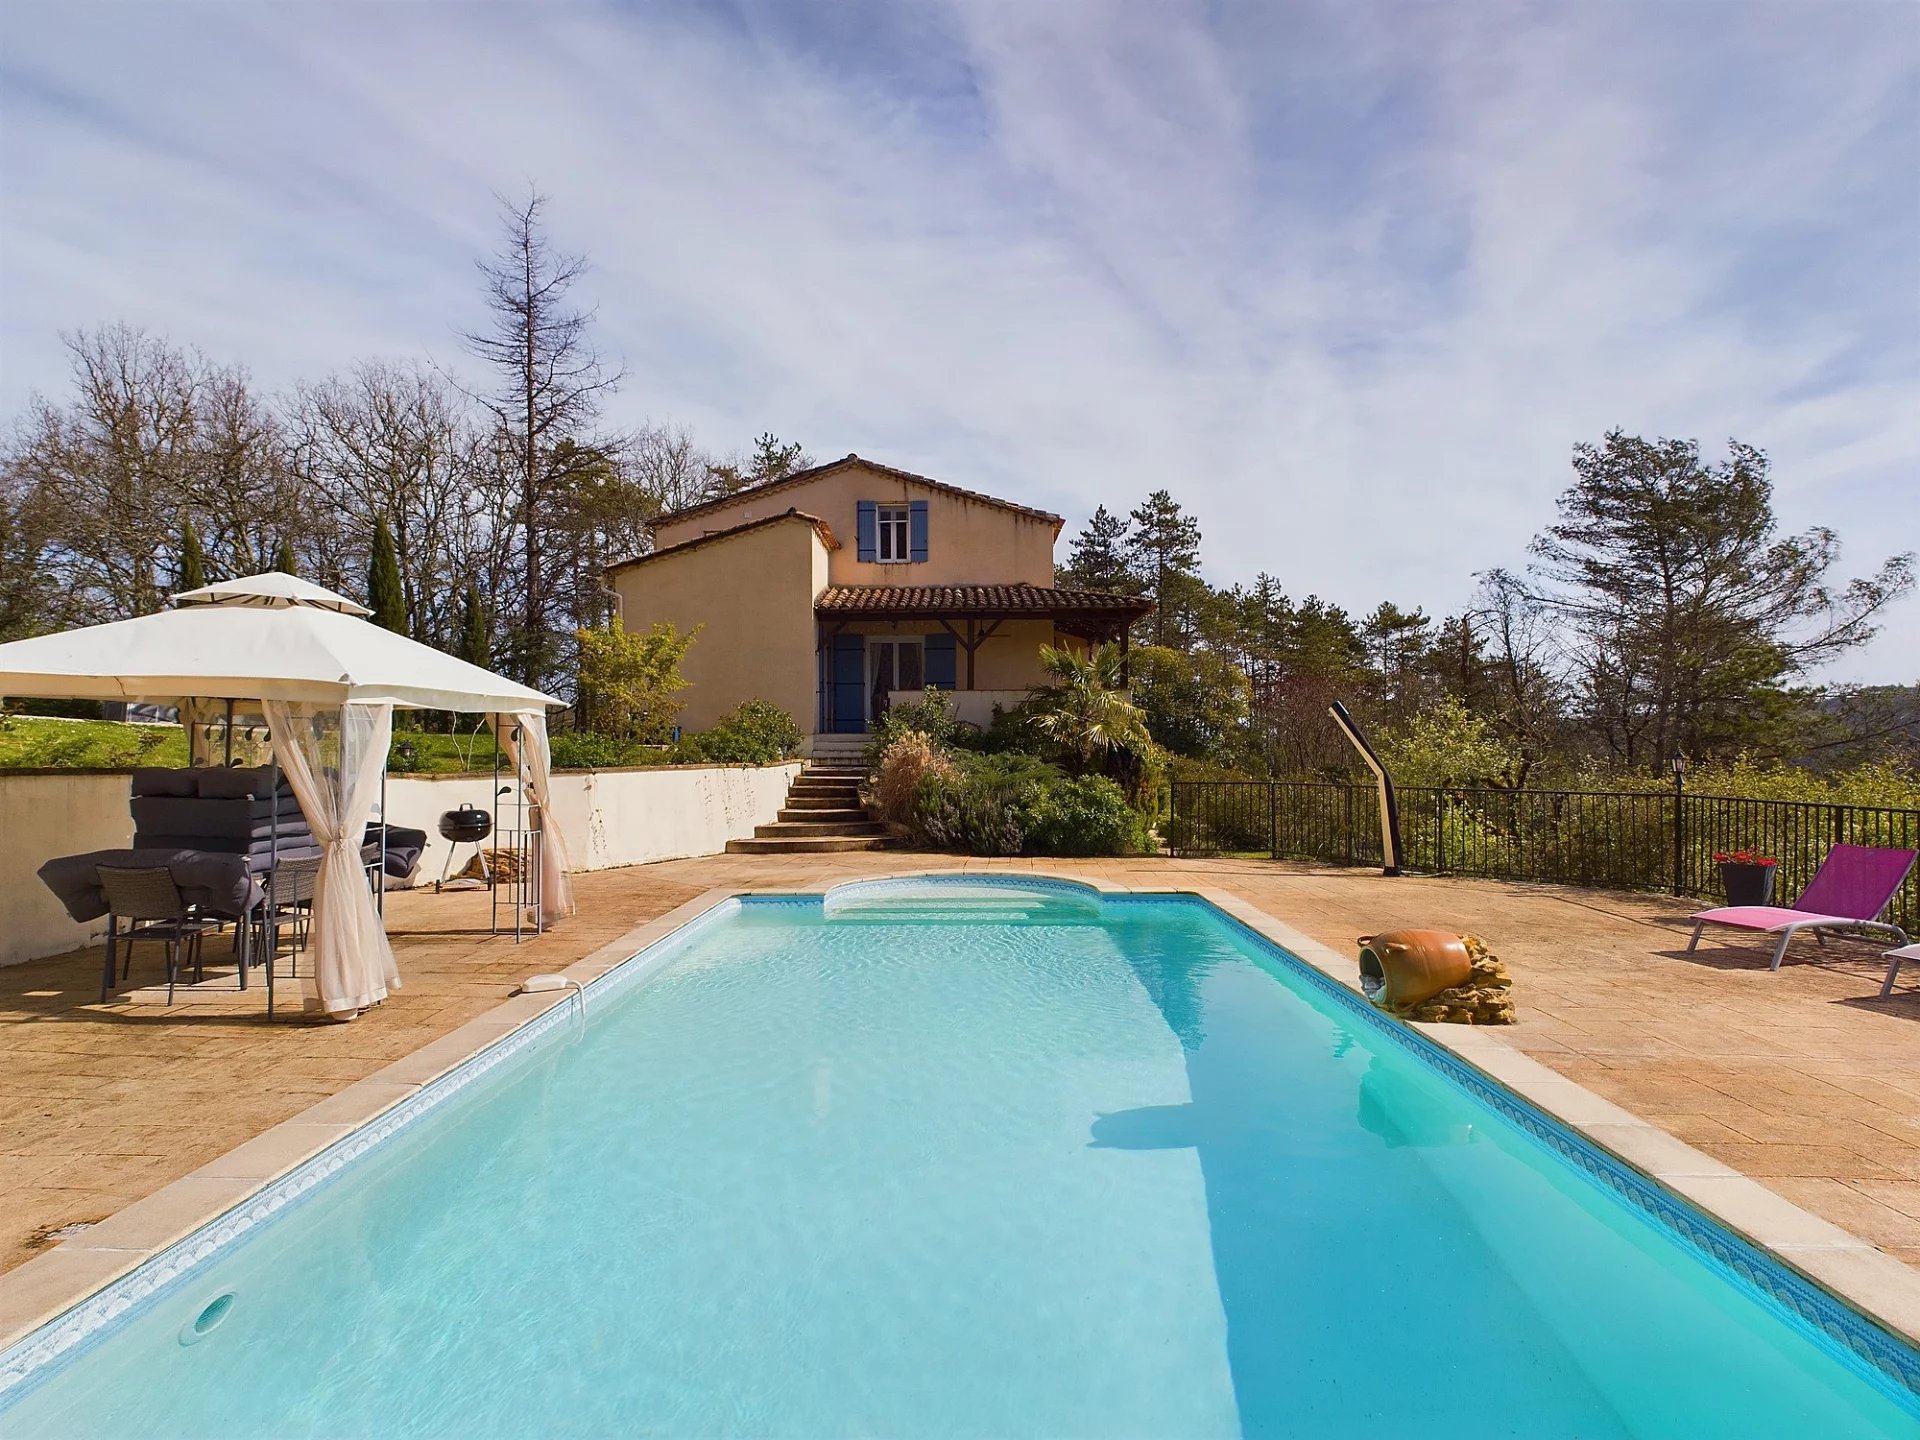 Lovely property with swimming pool and stunning views